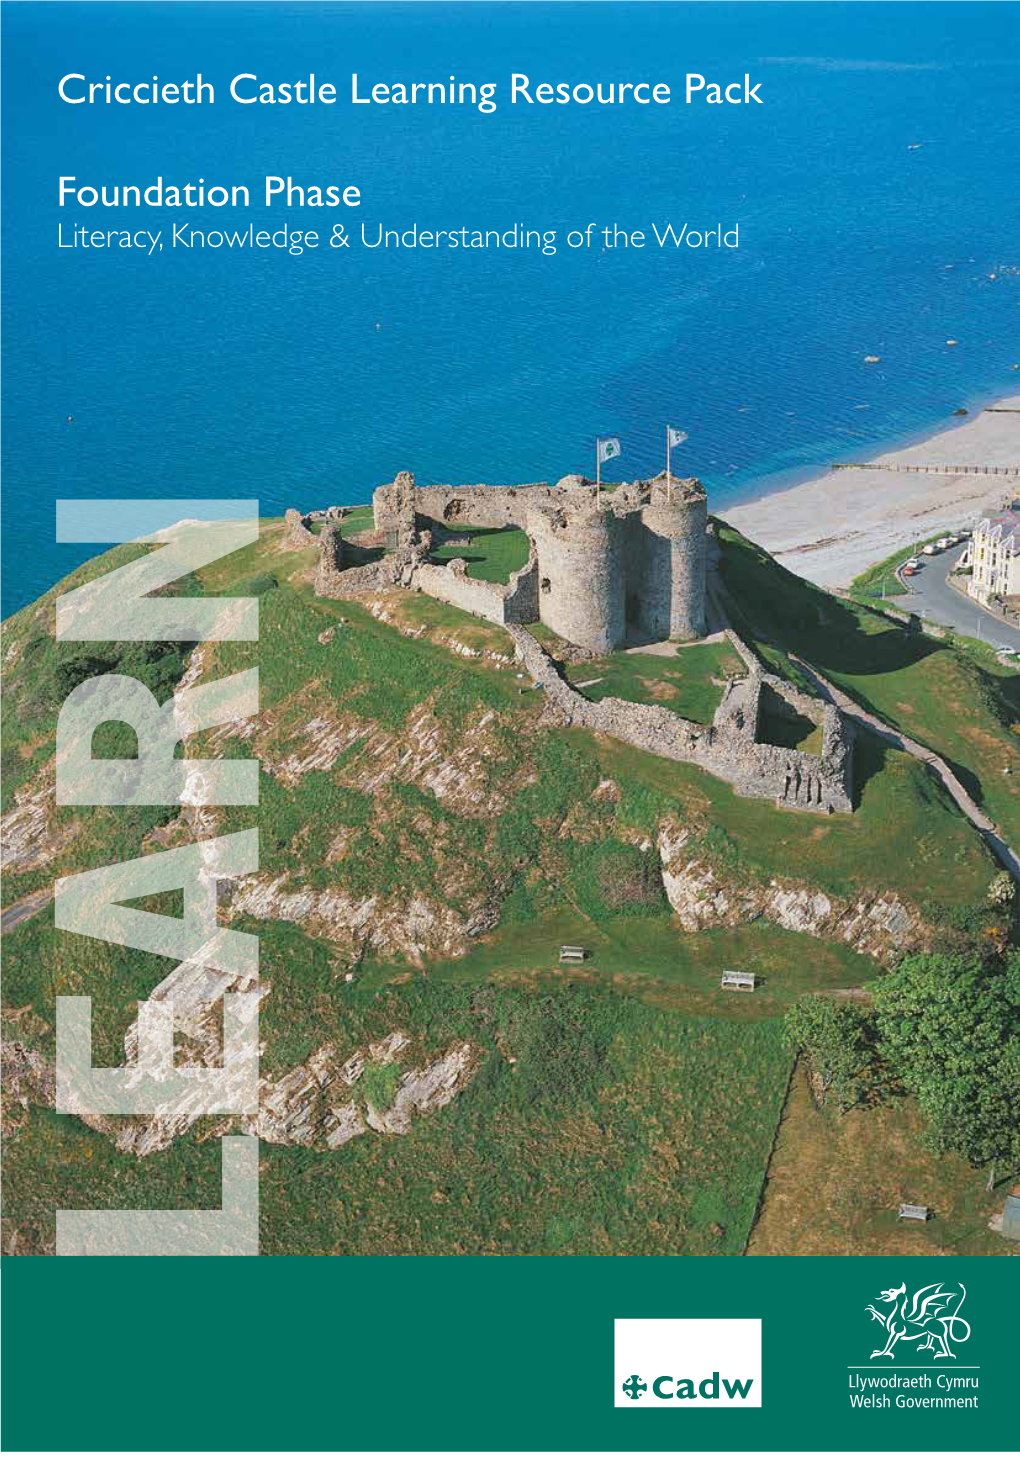 Criccieth Castle Learning Resource Pack